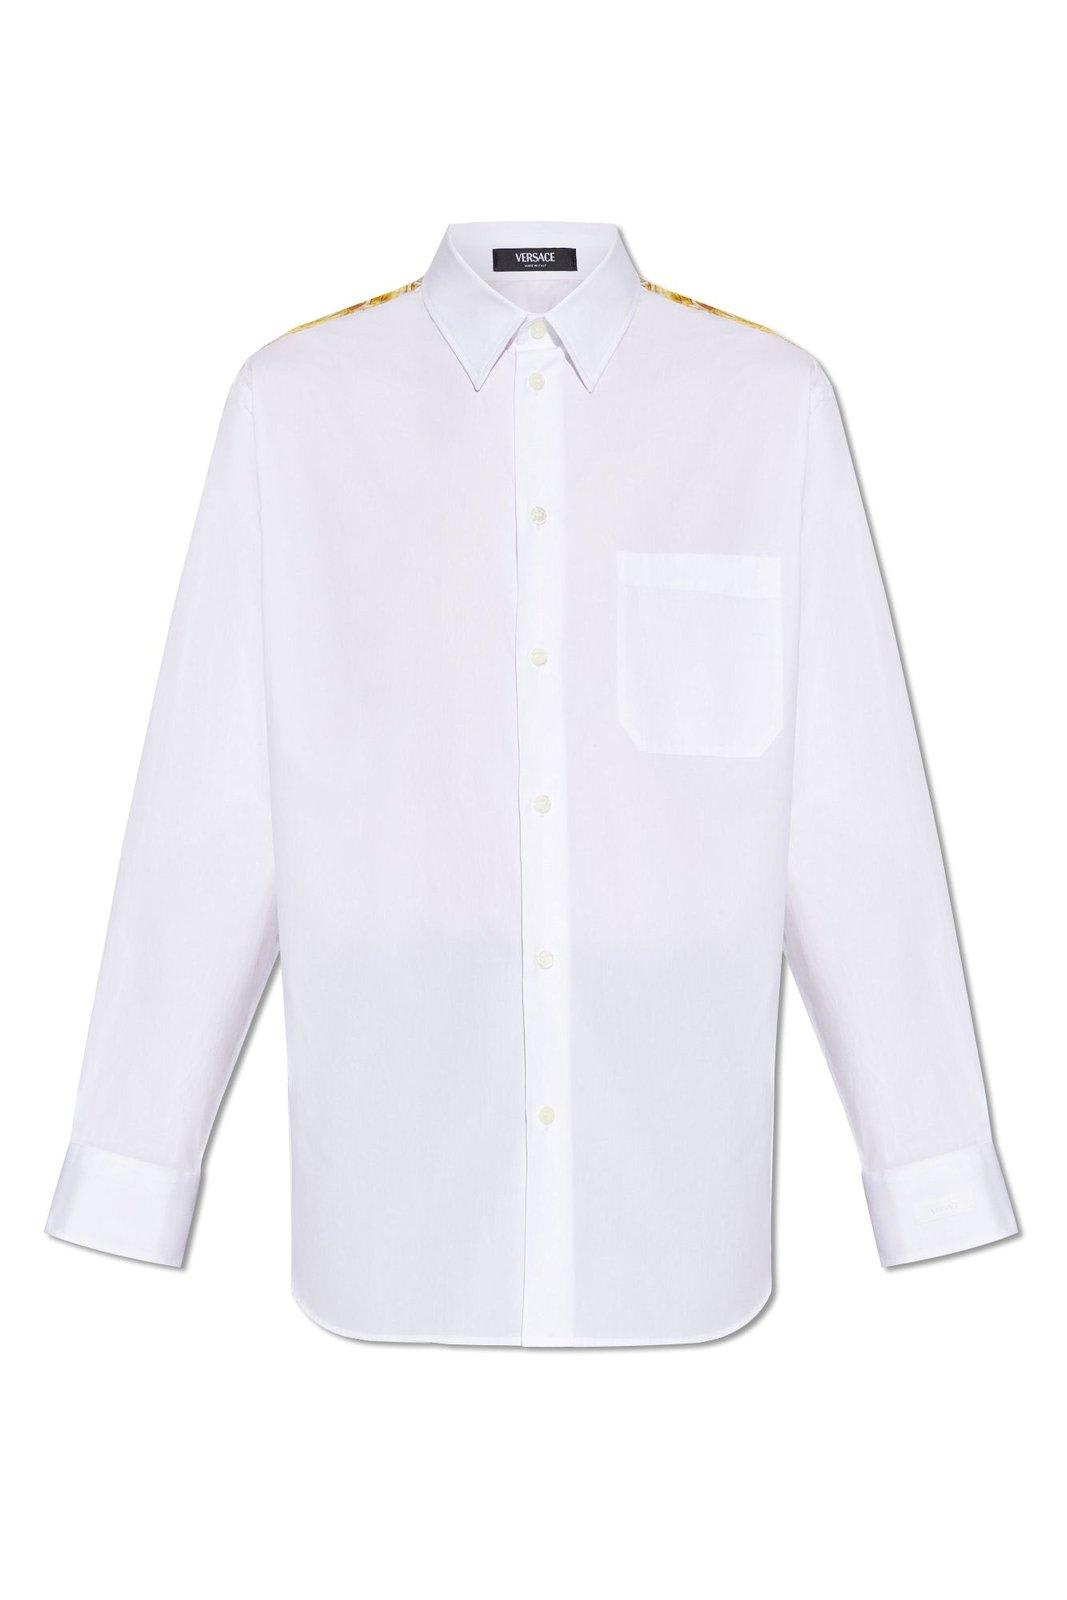 VERSACE BAROCCO-PANELLED BUTTON-UP SHIRT